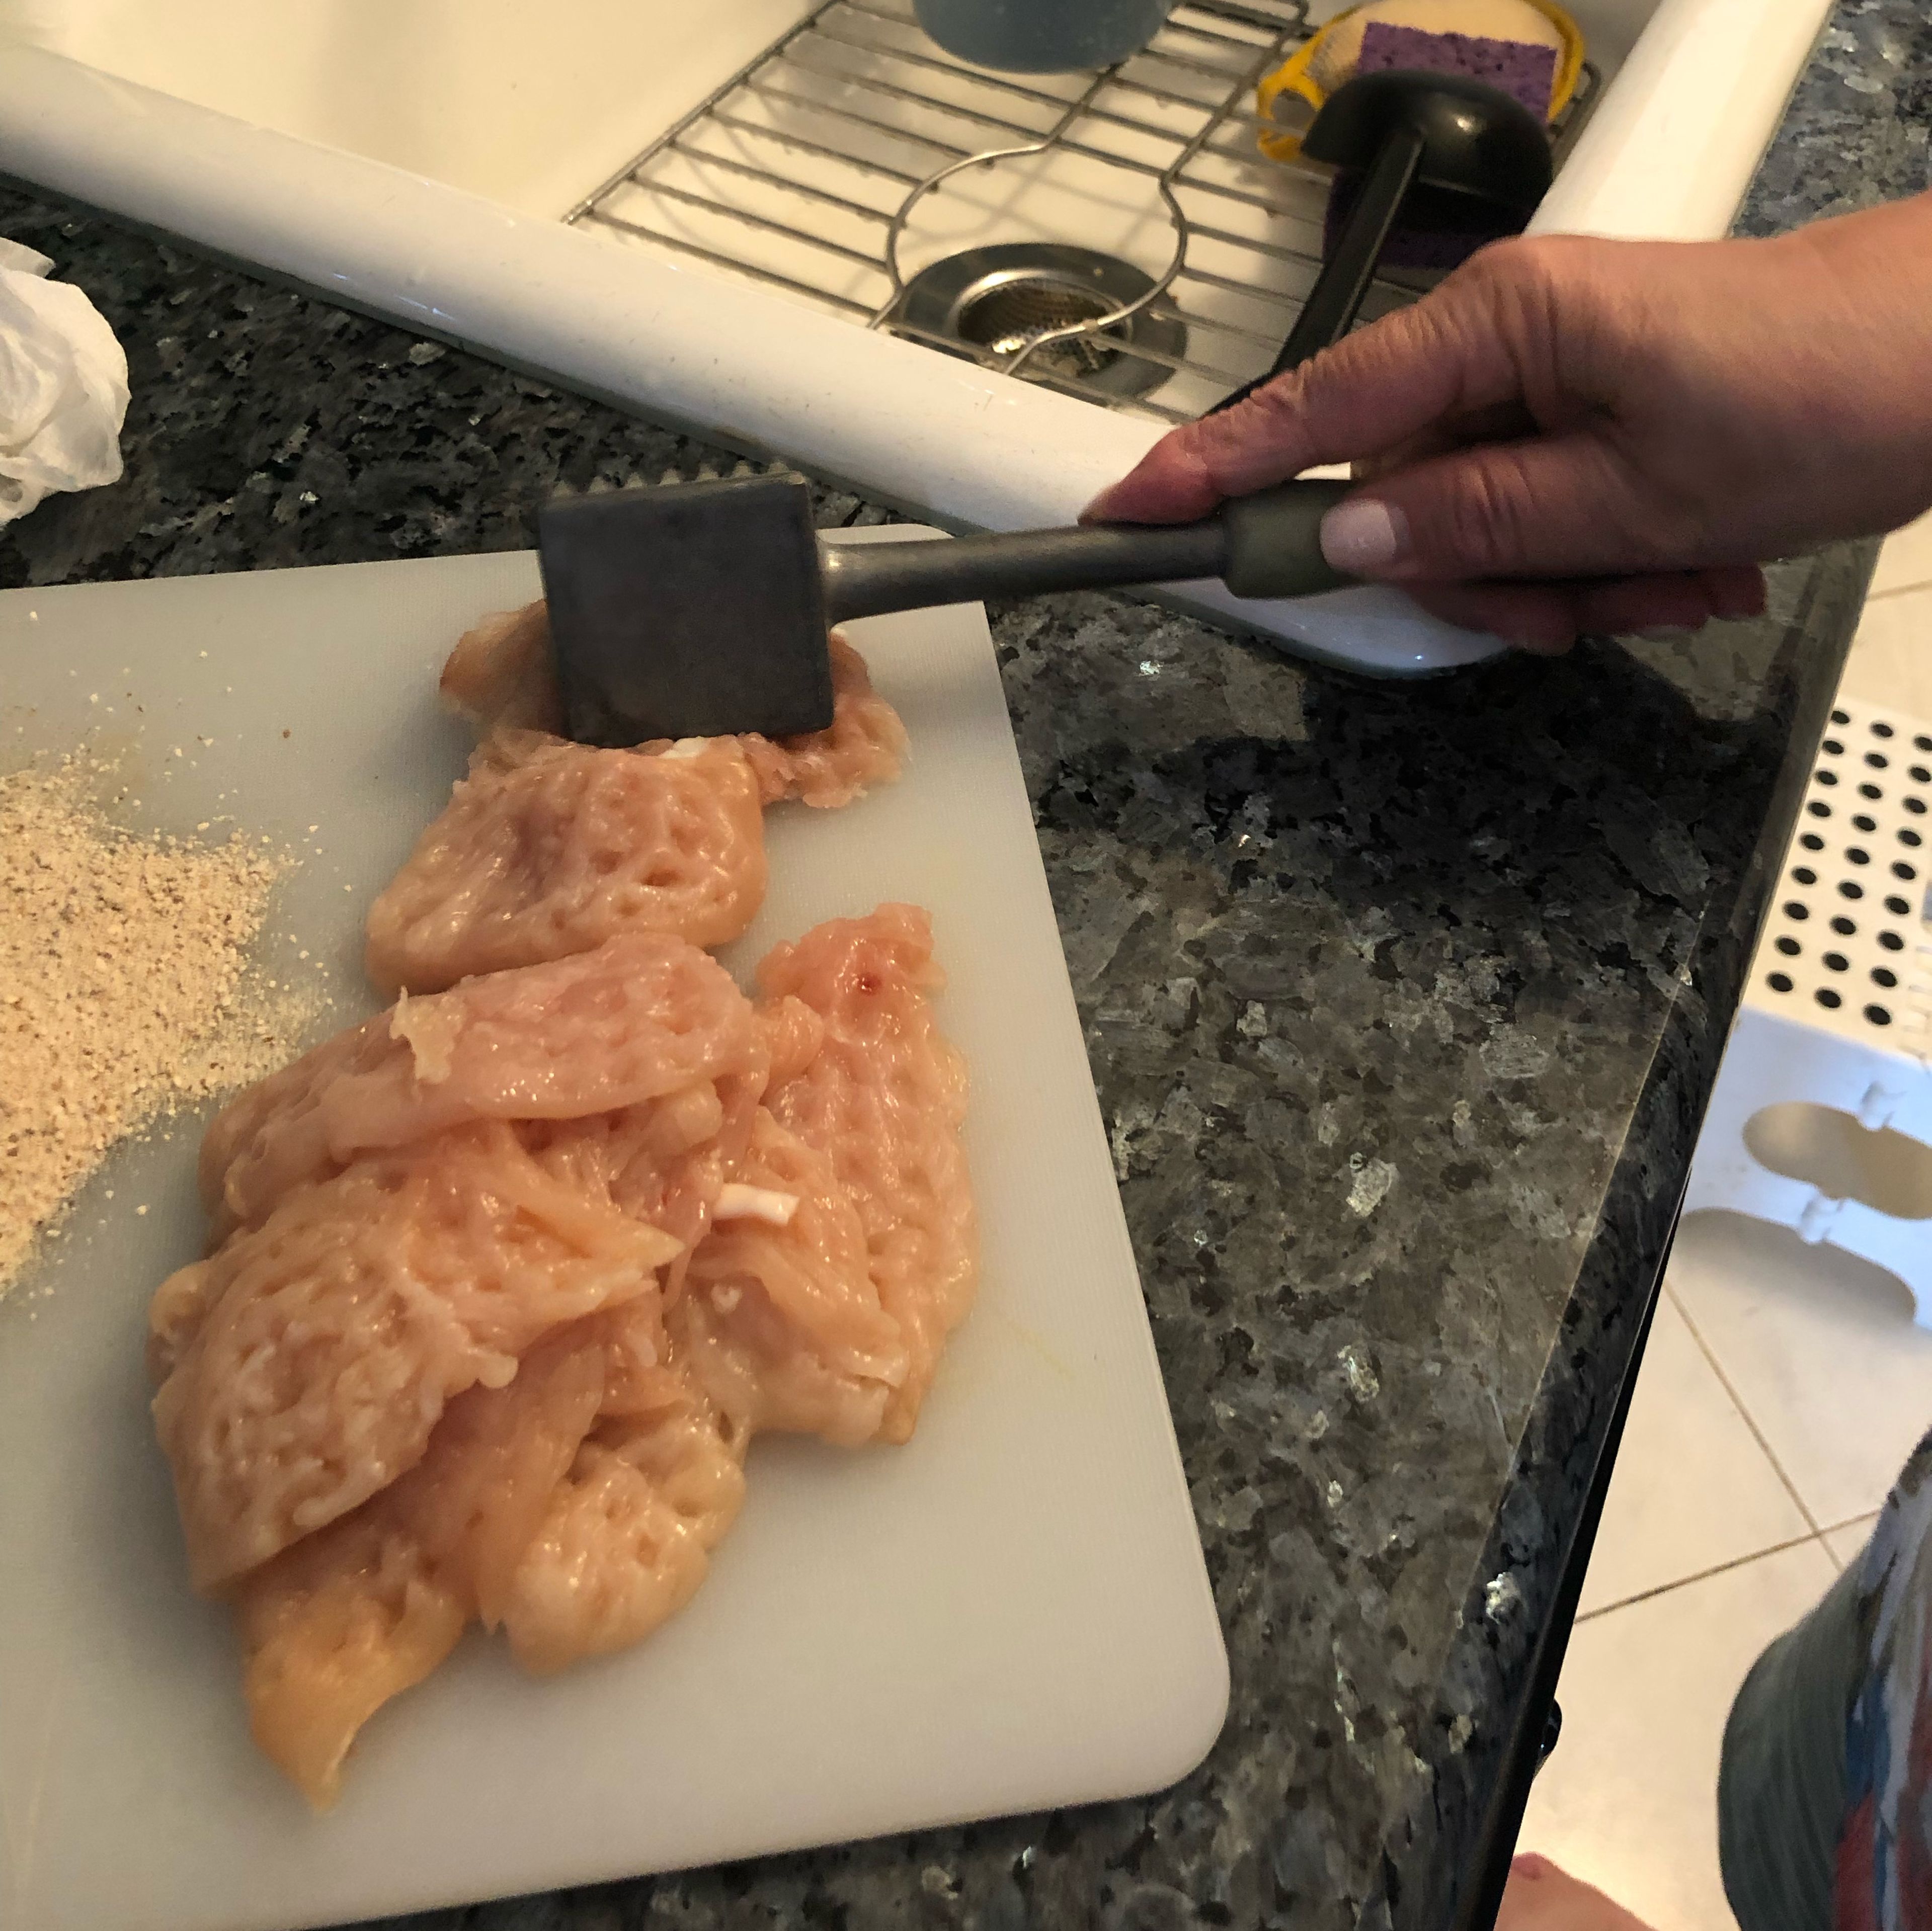 First wash the breasts and dry it with a paper towel. Then take a meat mallet and beat the chicken breasts on both sides. Beat until soft and thin